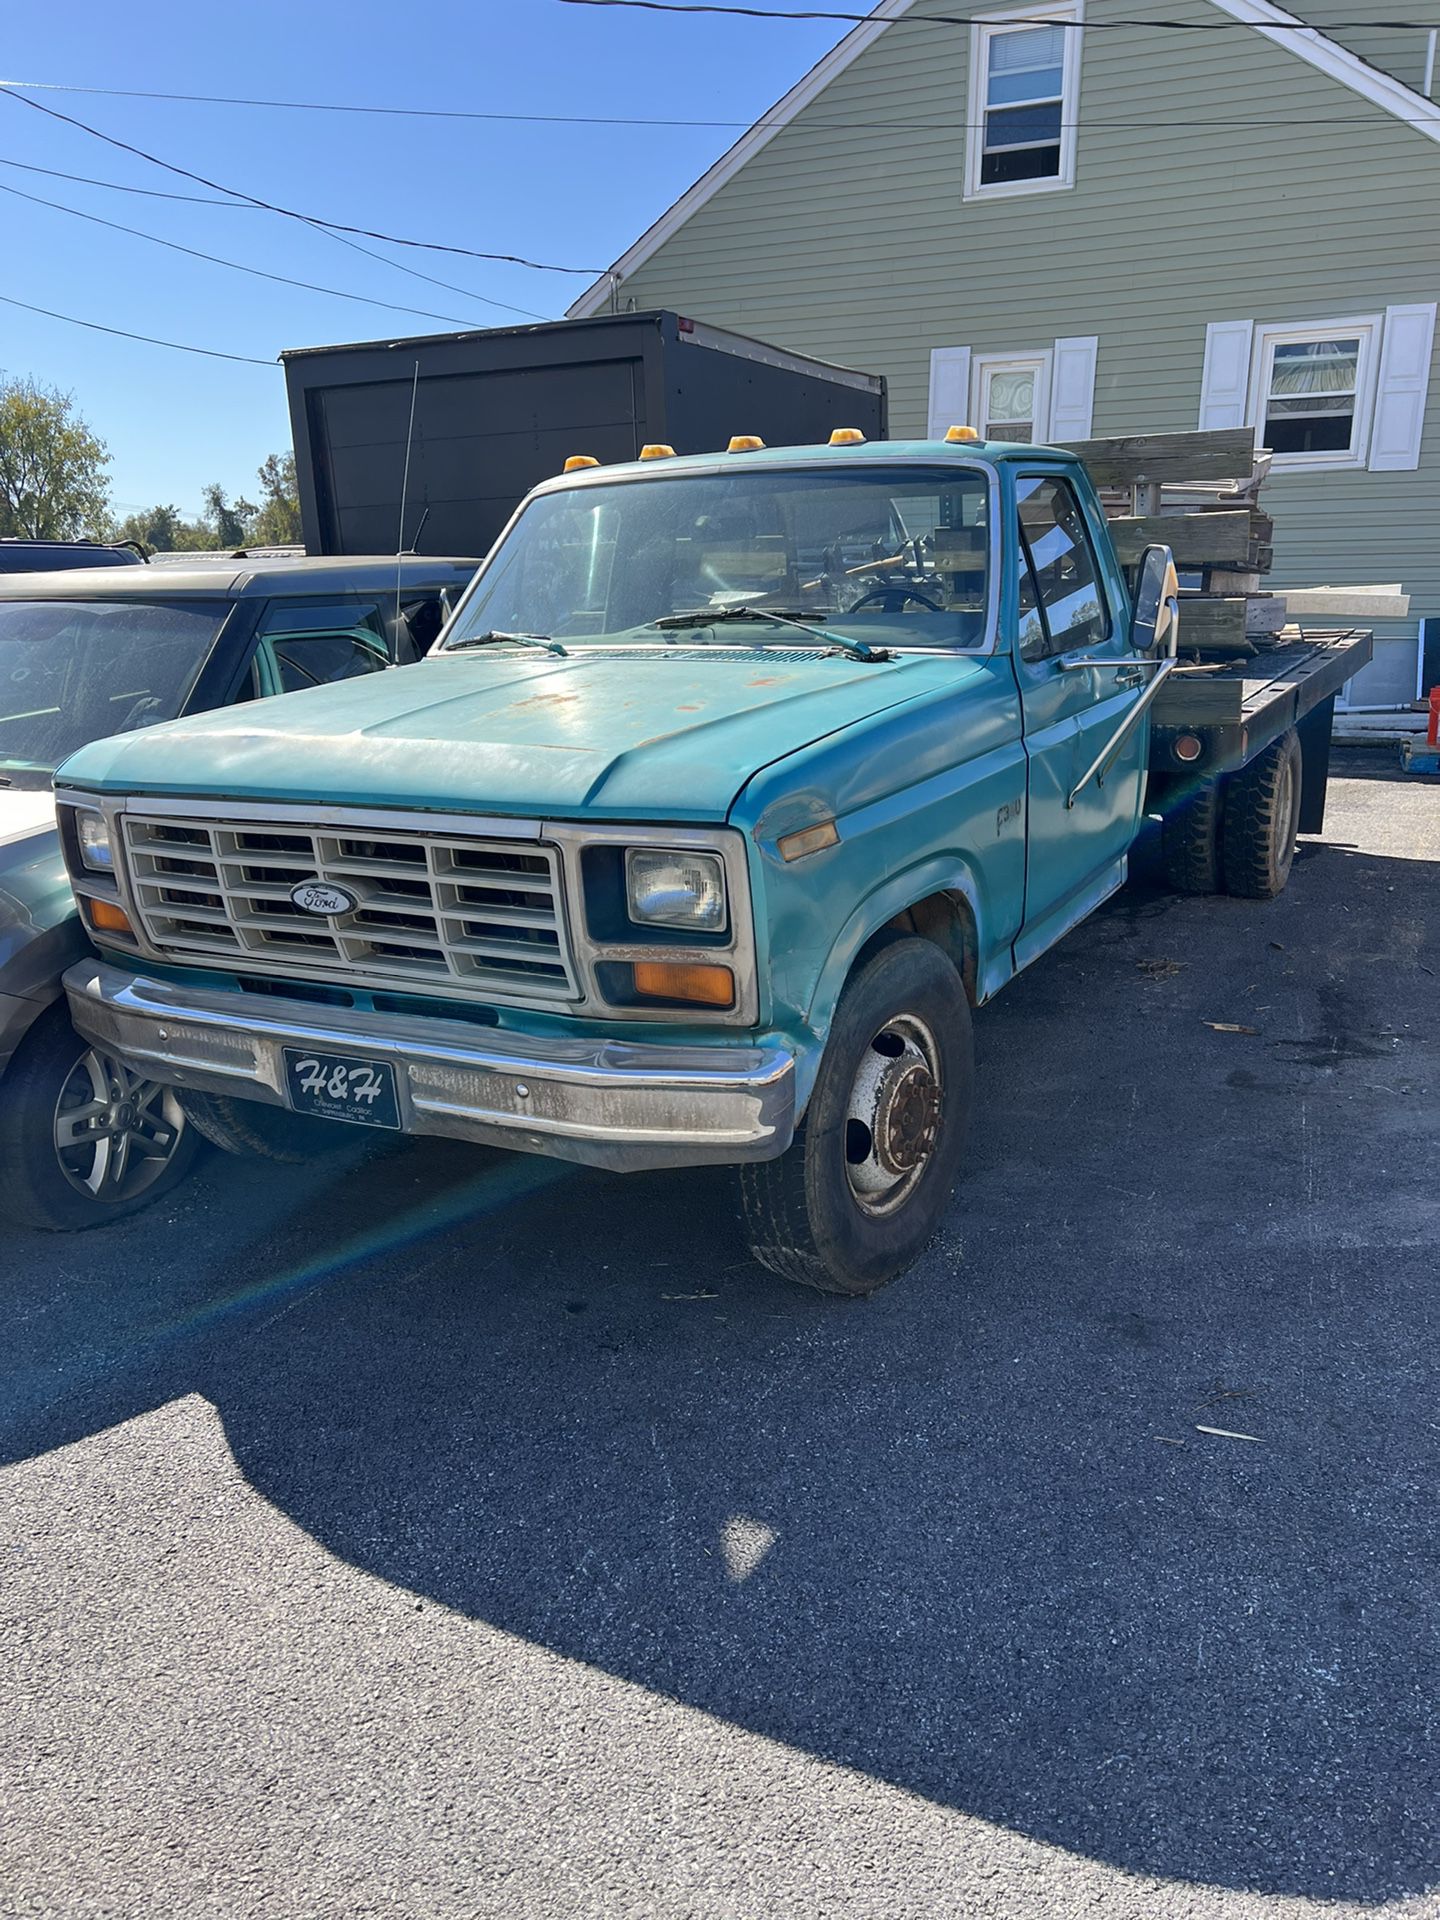 ****1986 Ford F-350 Flatbed Truck For Sale****